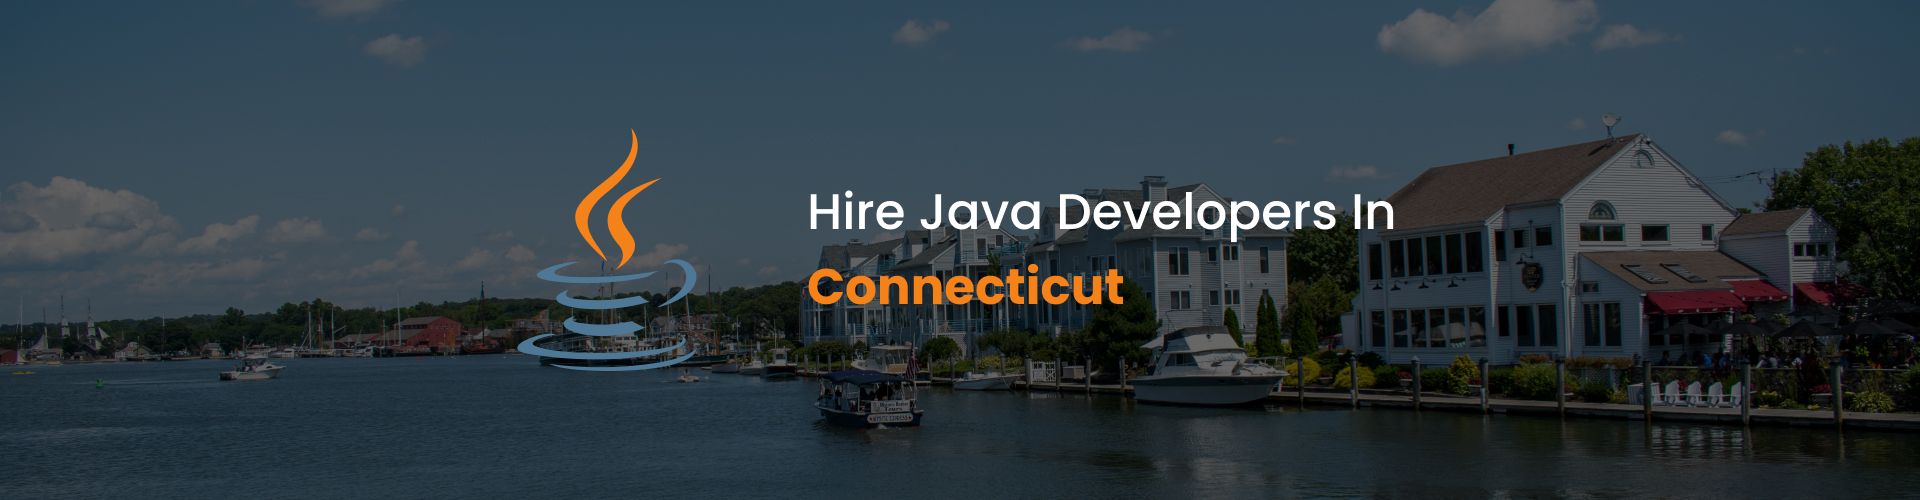 hire java developers in connecticut